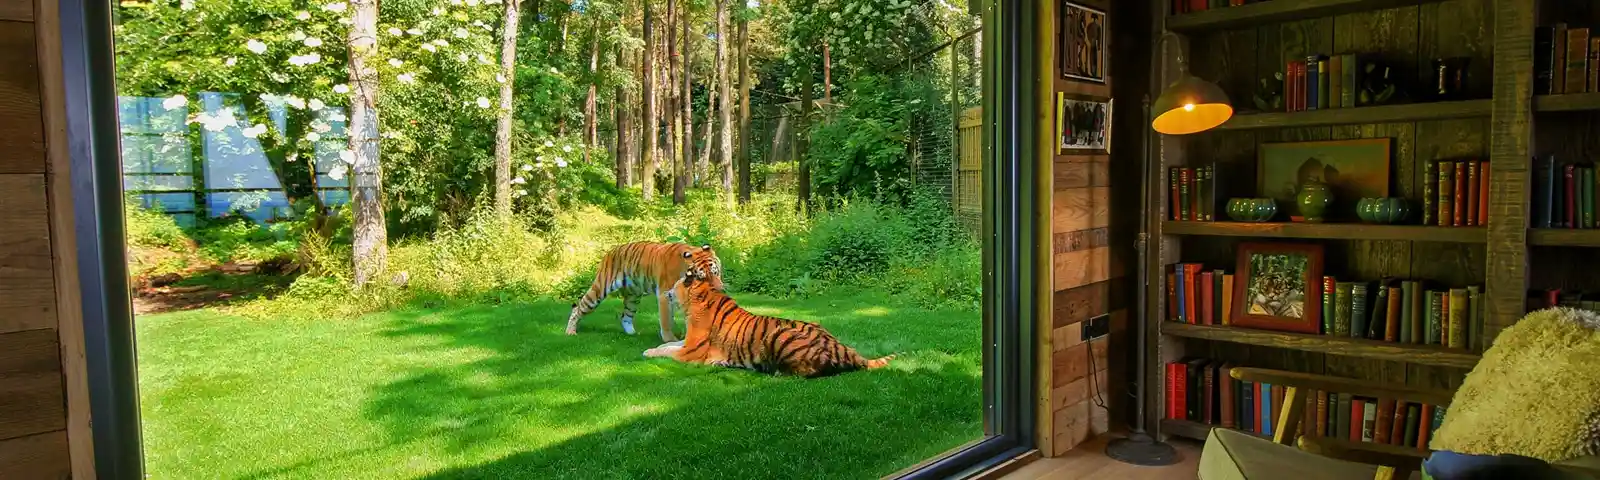 Tiger Lodge at Port Lympne Reserve Living Area Second View - Low Res.jpg